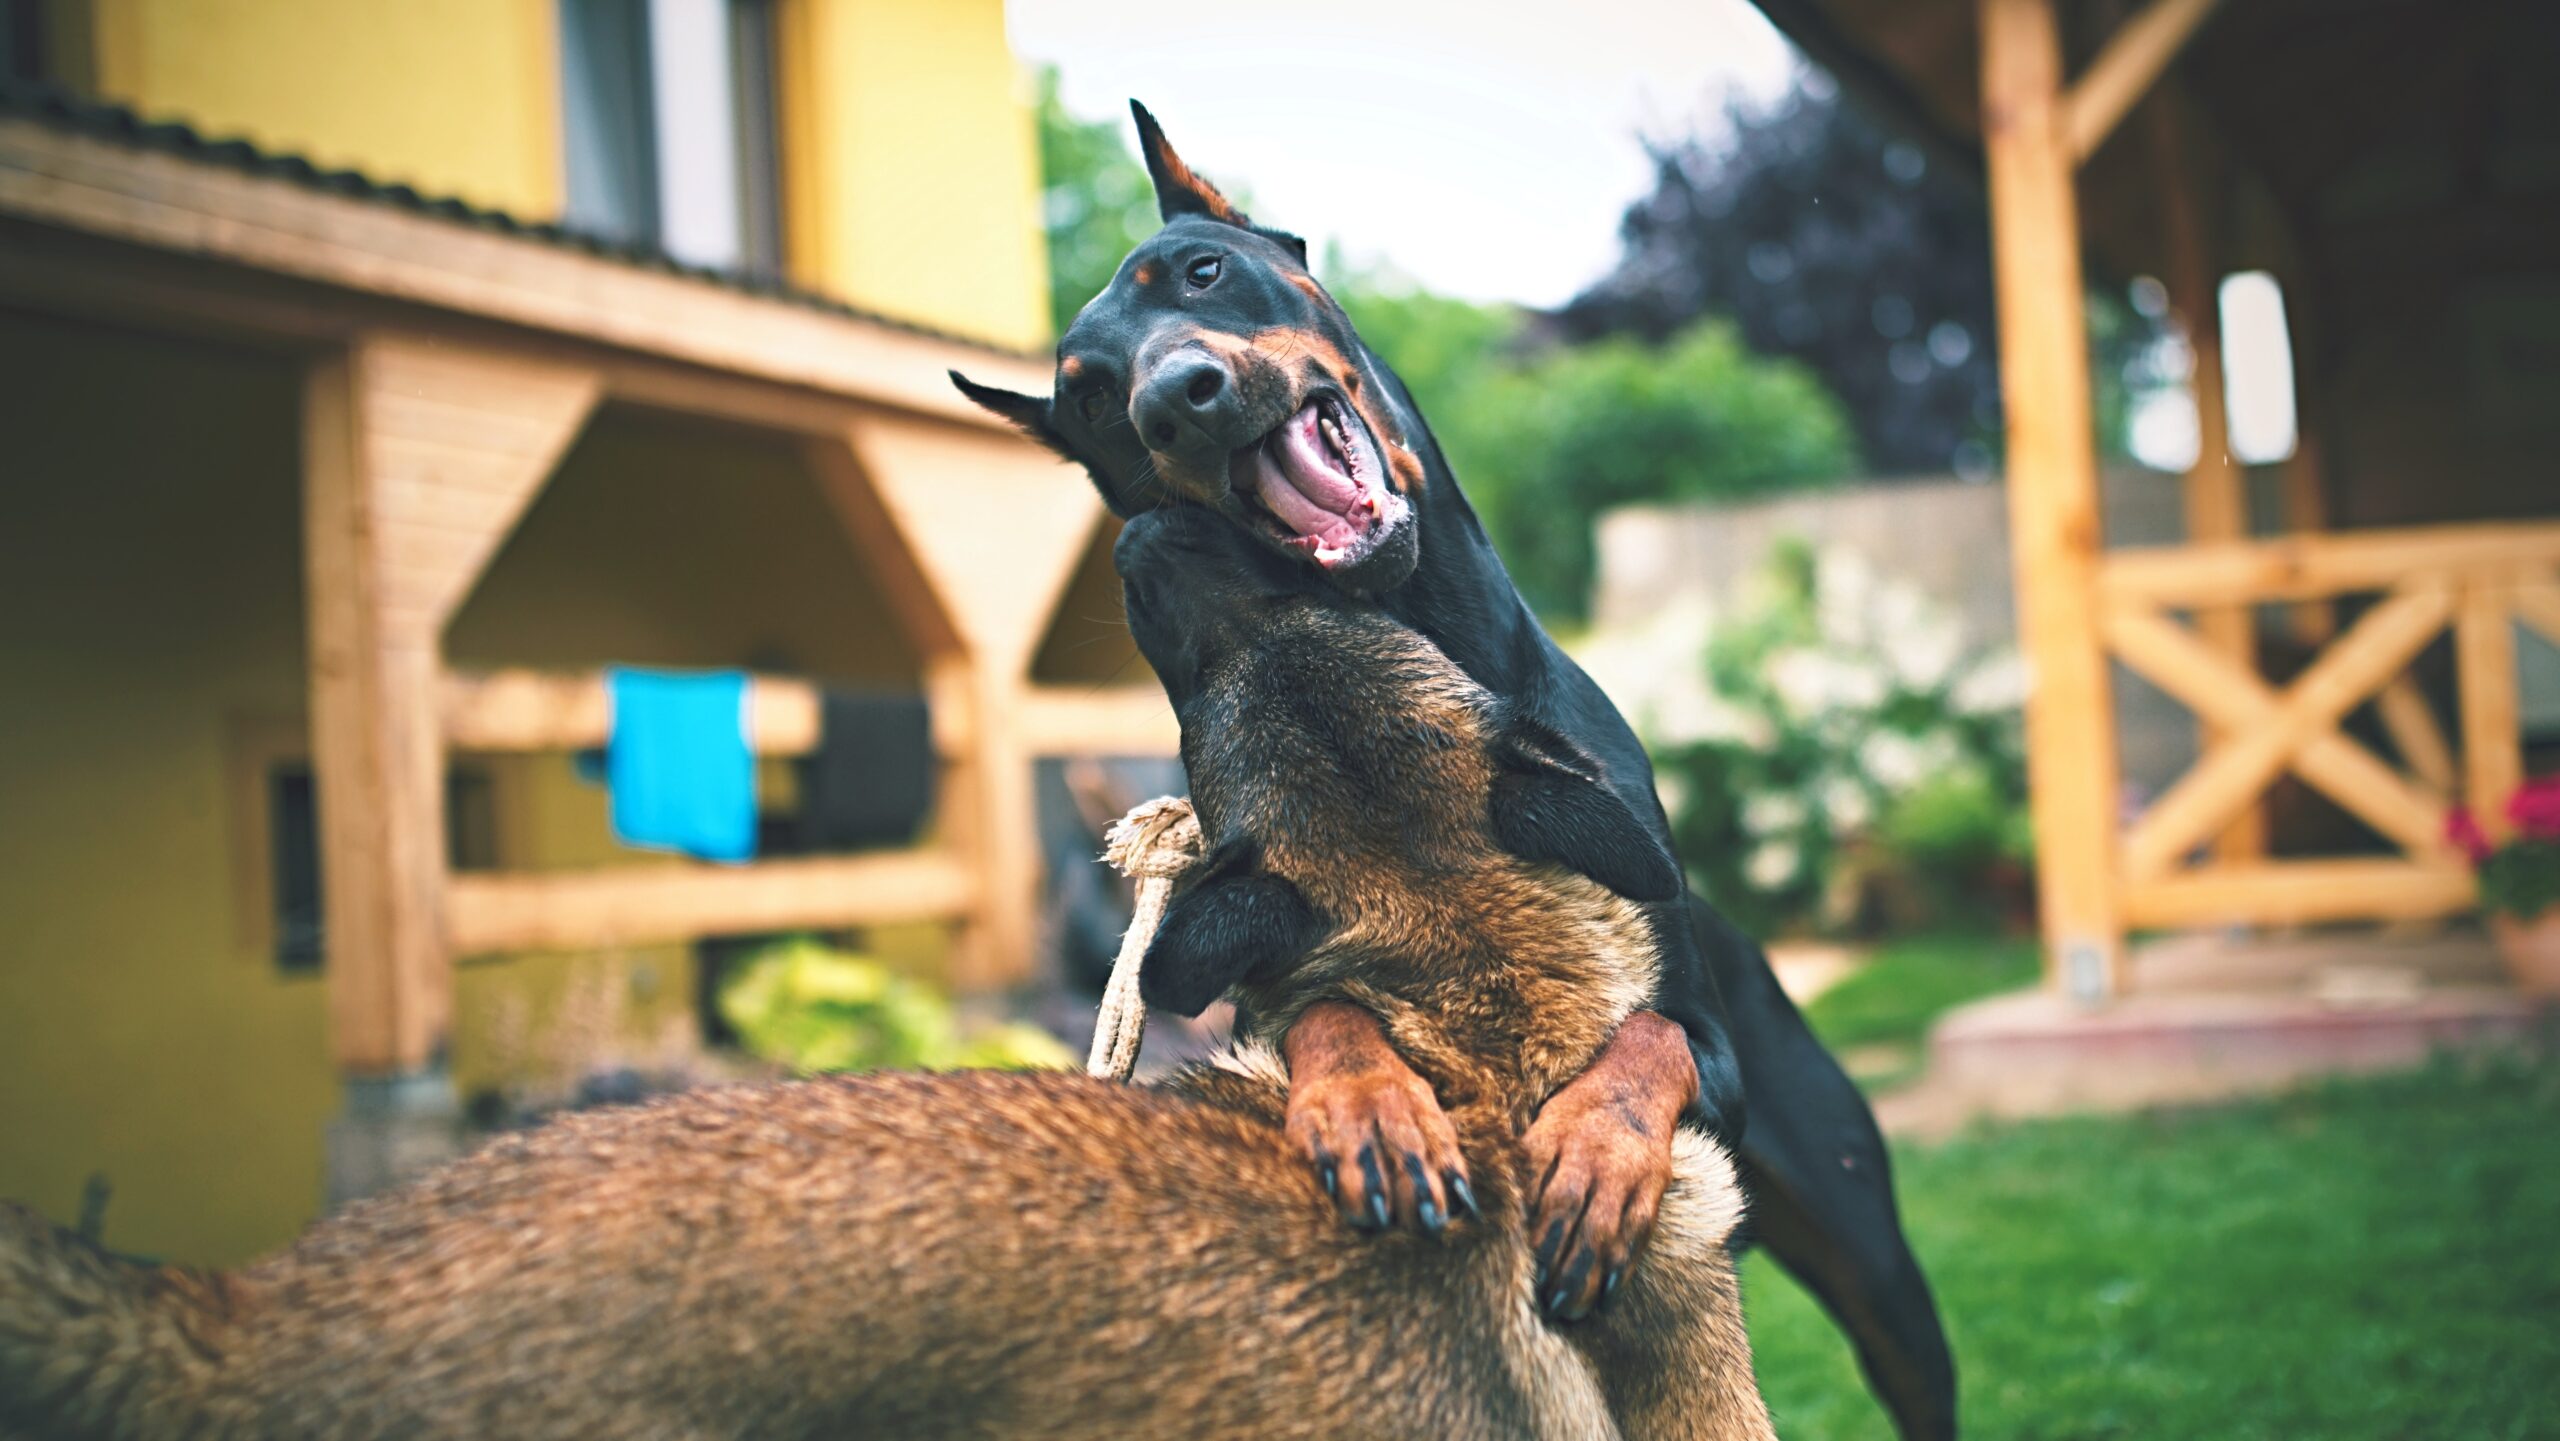 Adult Doberman Pinschers aggressively play together, but represent dog bite injuries.